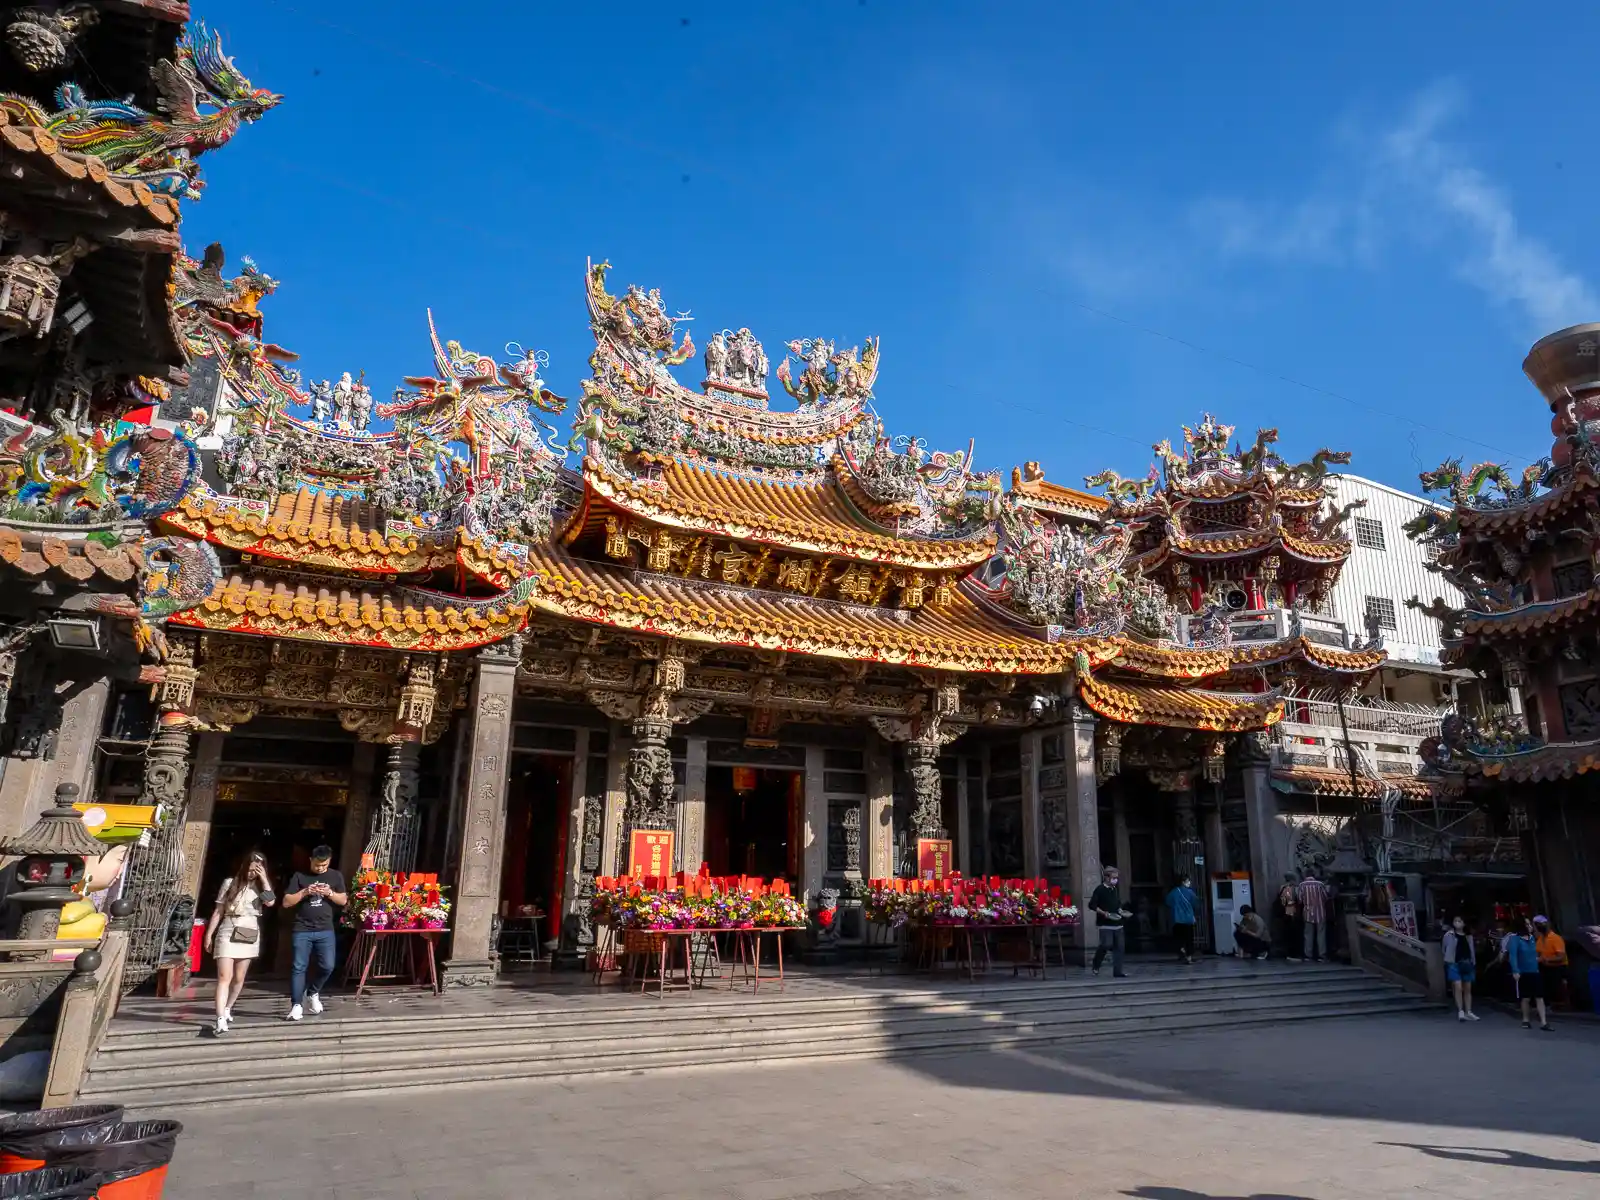 The colorful front facade of the Dajia Jenn Lann Temple.